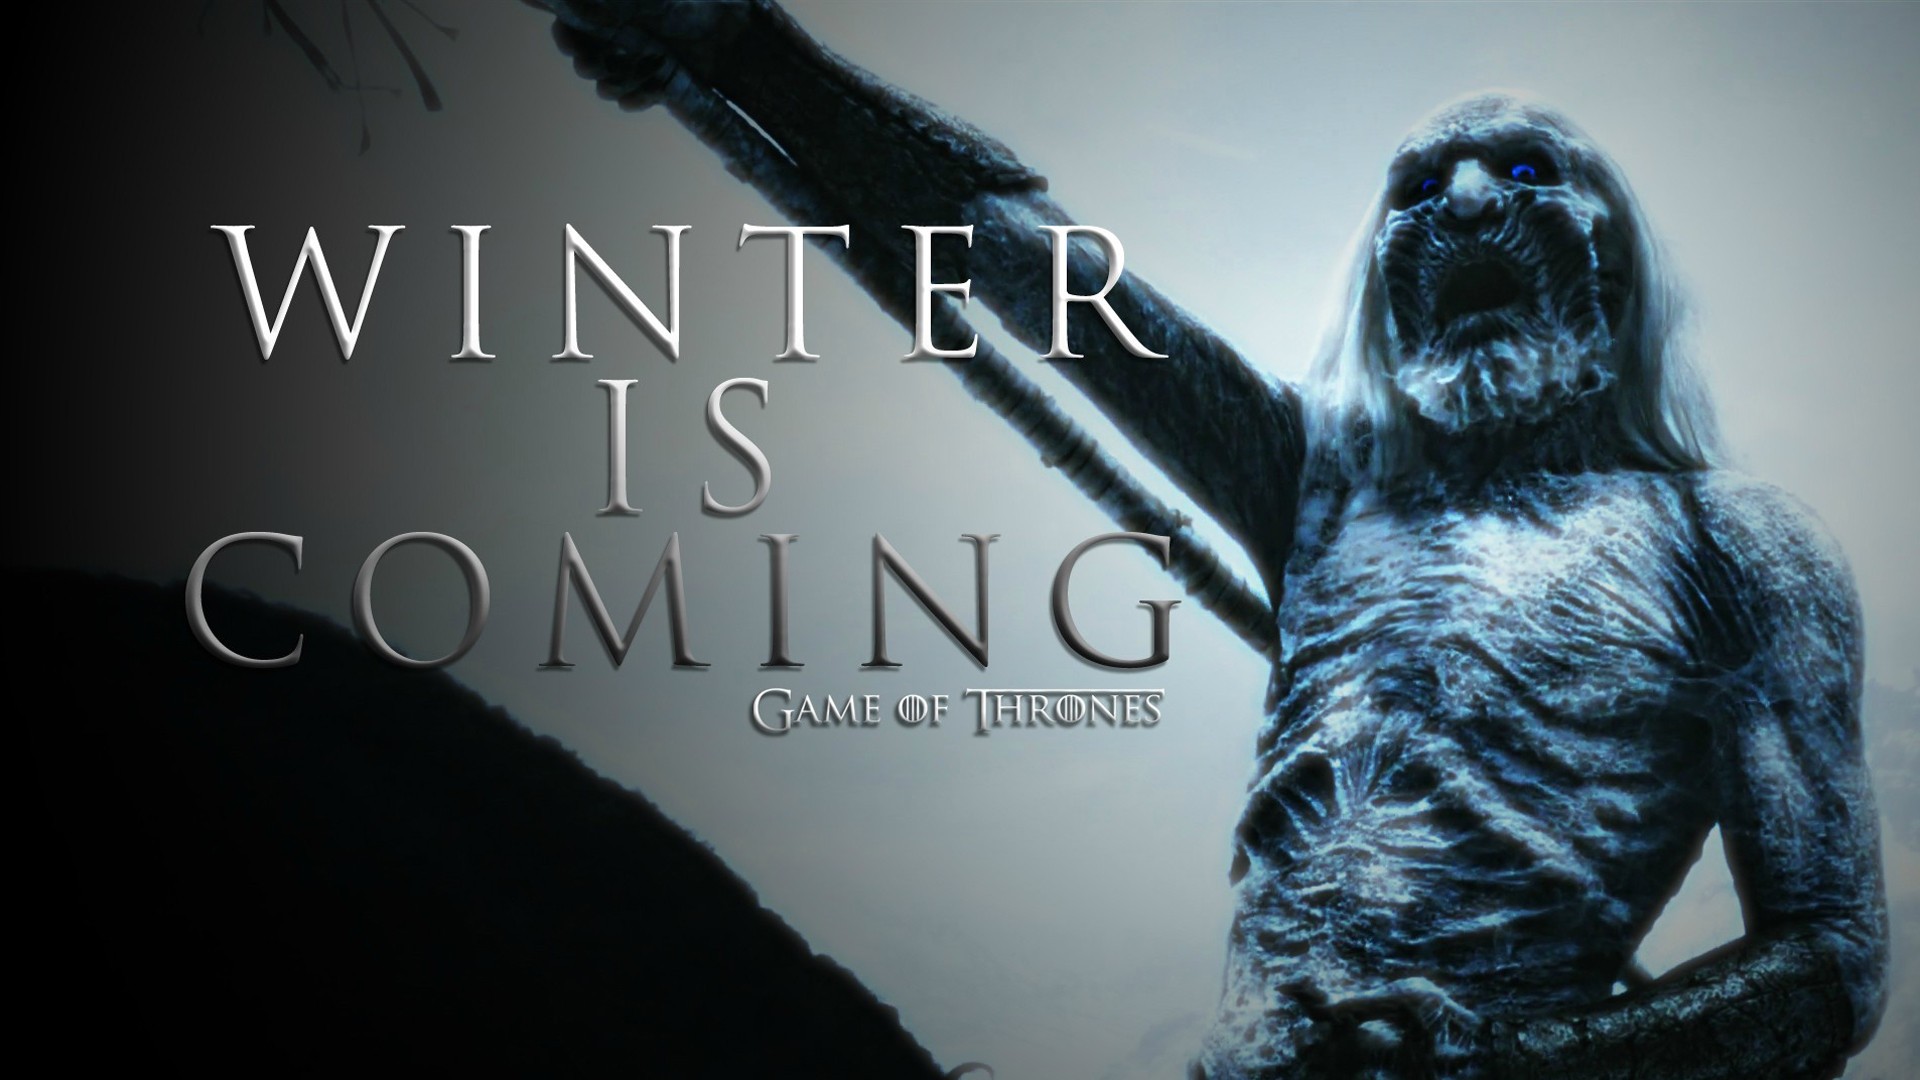 Game Of Thrones, Winter Is Coming, White Walkers Wallpaper